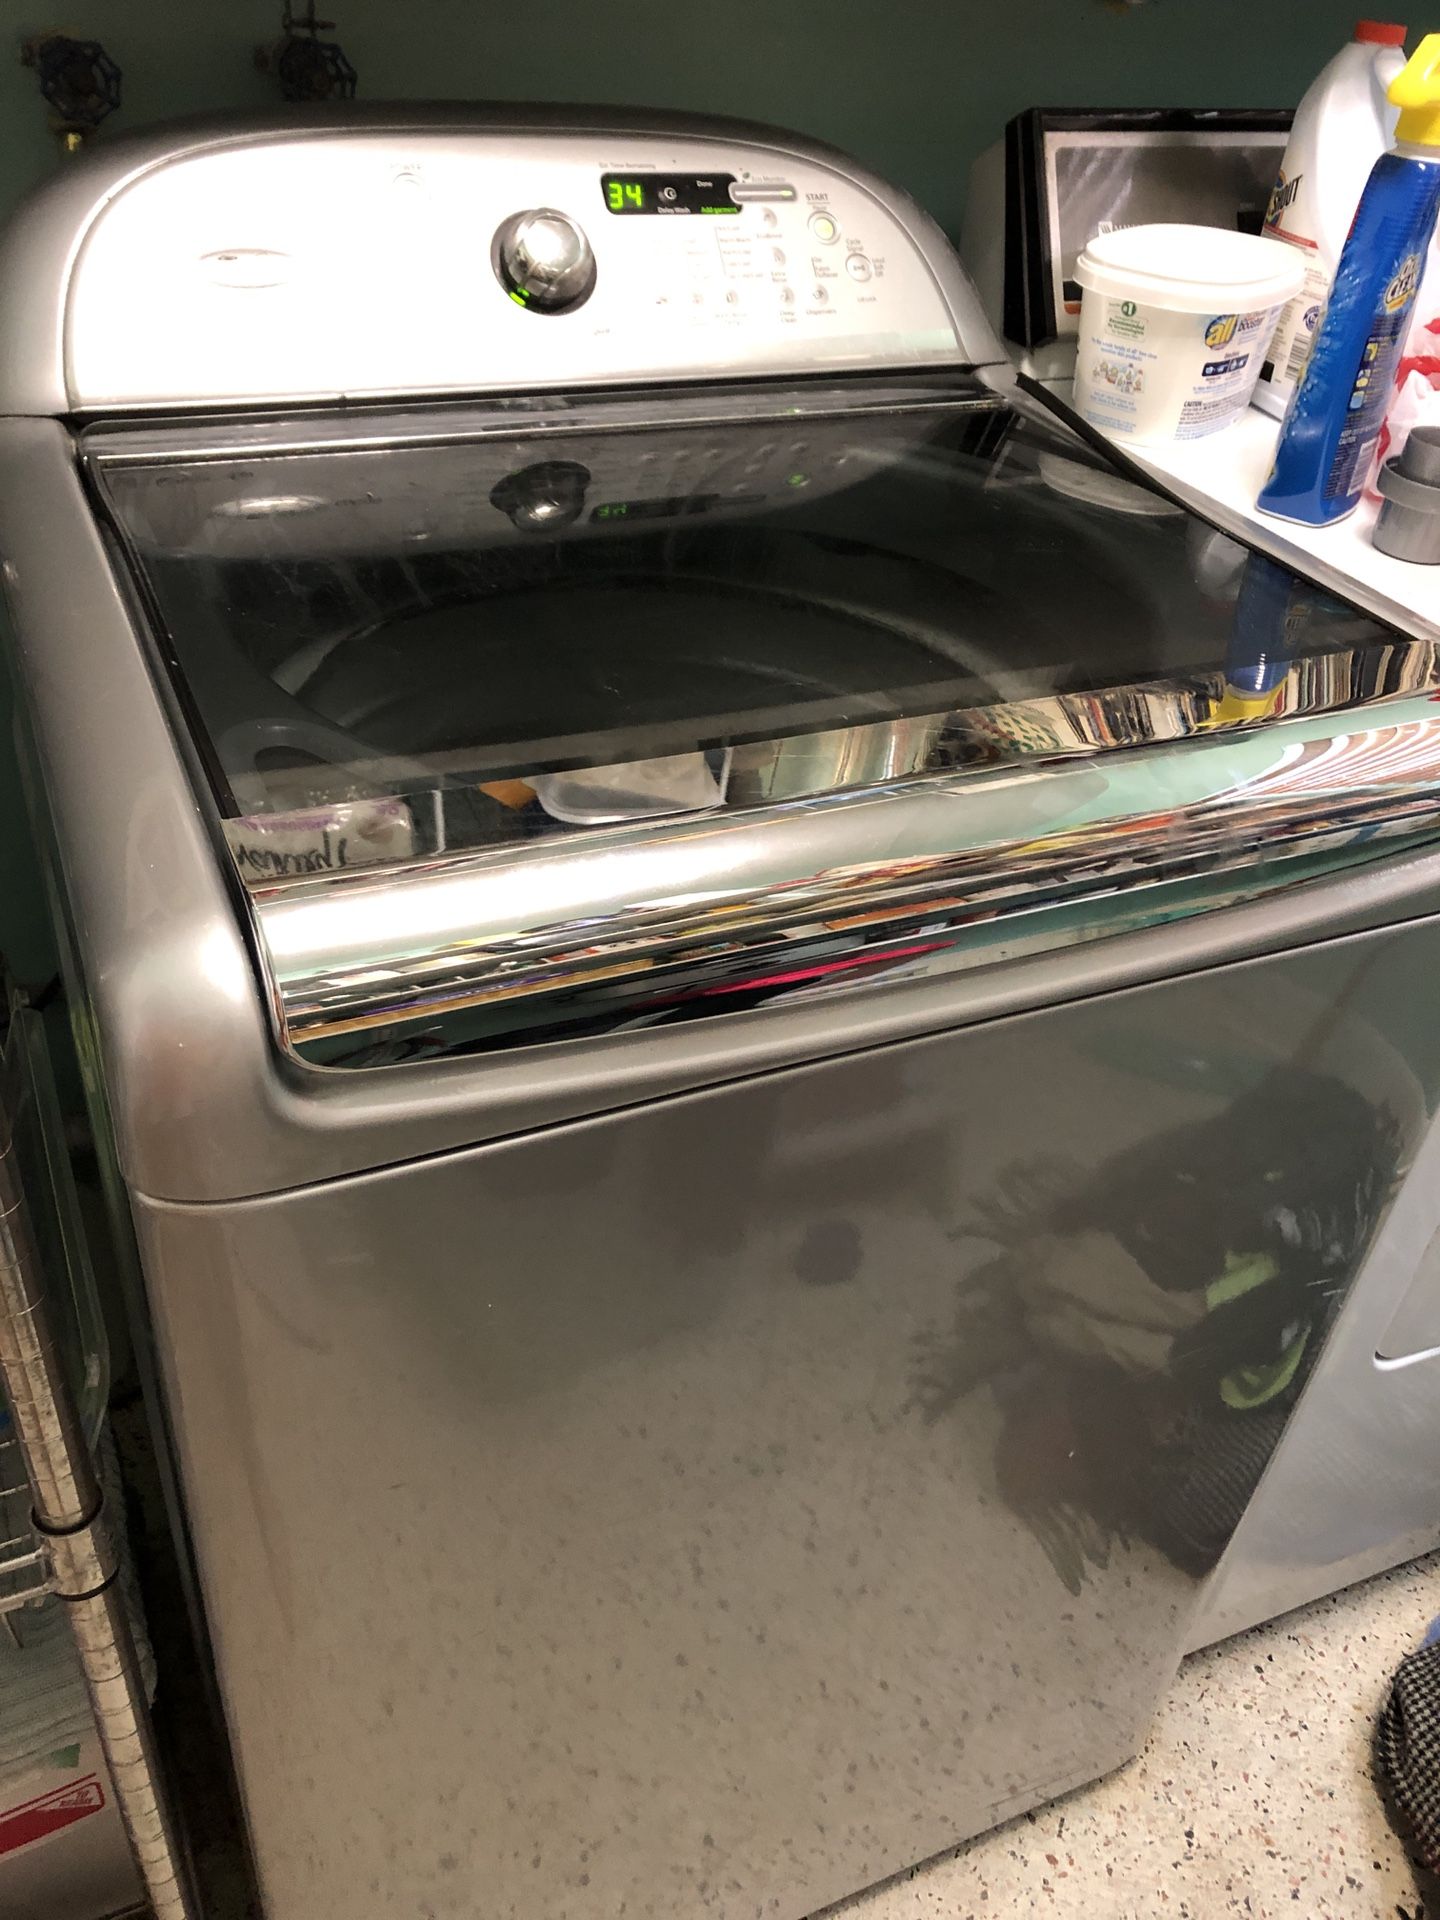 Whirlpool cabrio washer. Still works but has an issue. Can be sold for parts or for a handyman who can fix the tub bearings!